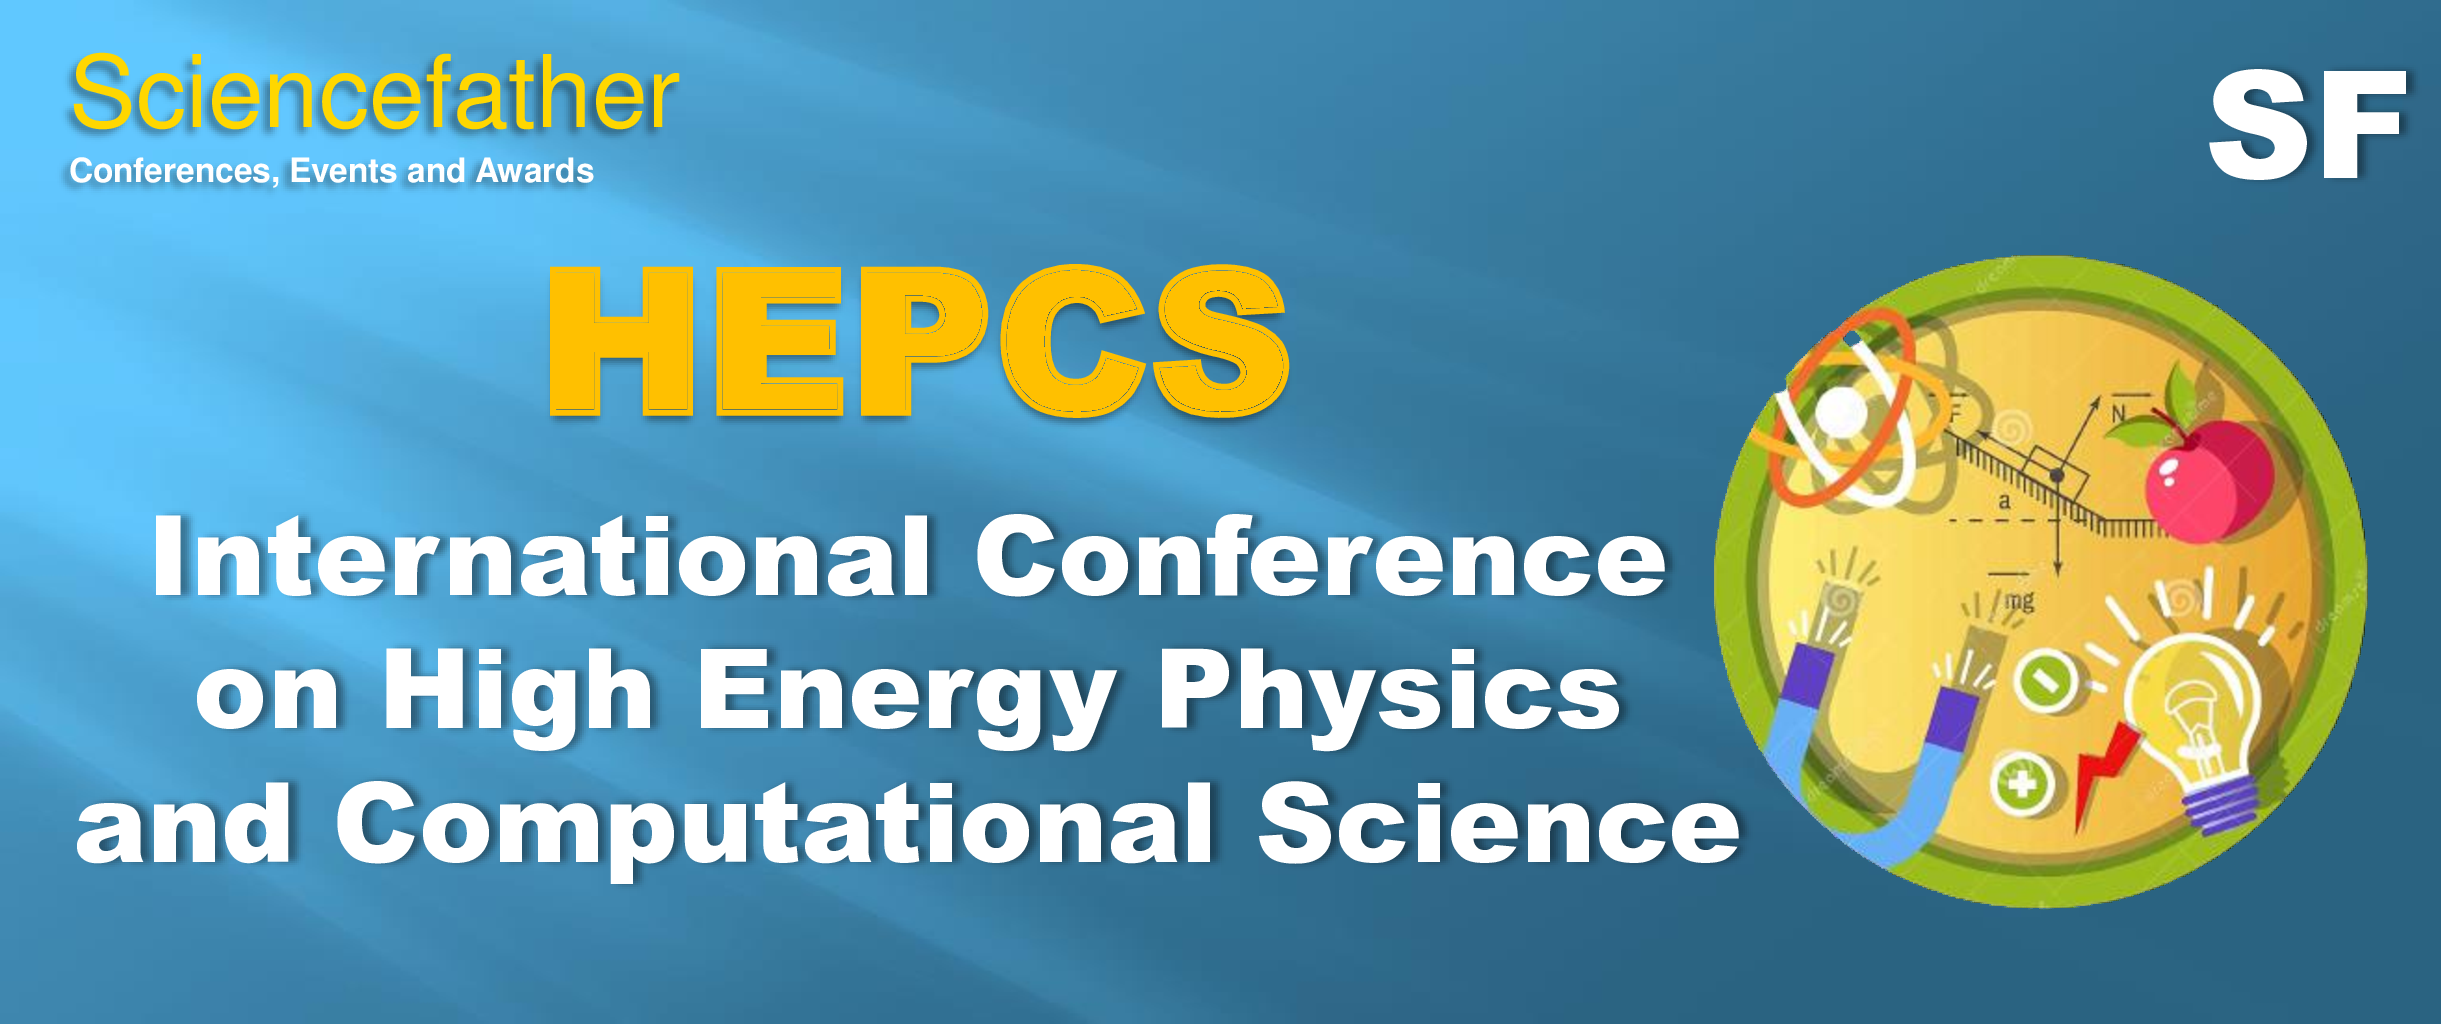 19th International Conference on High Energy Physics and Computational Science, Online Event